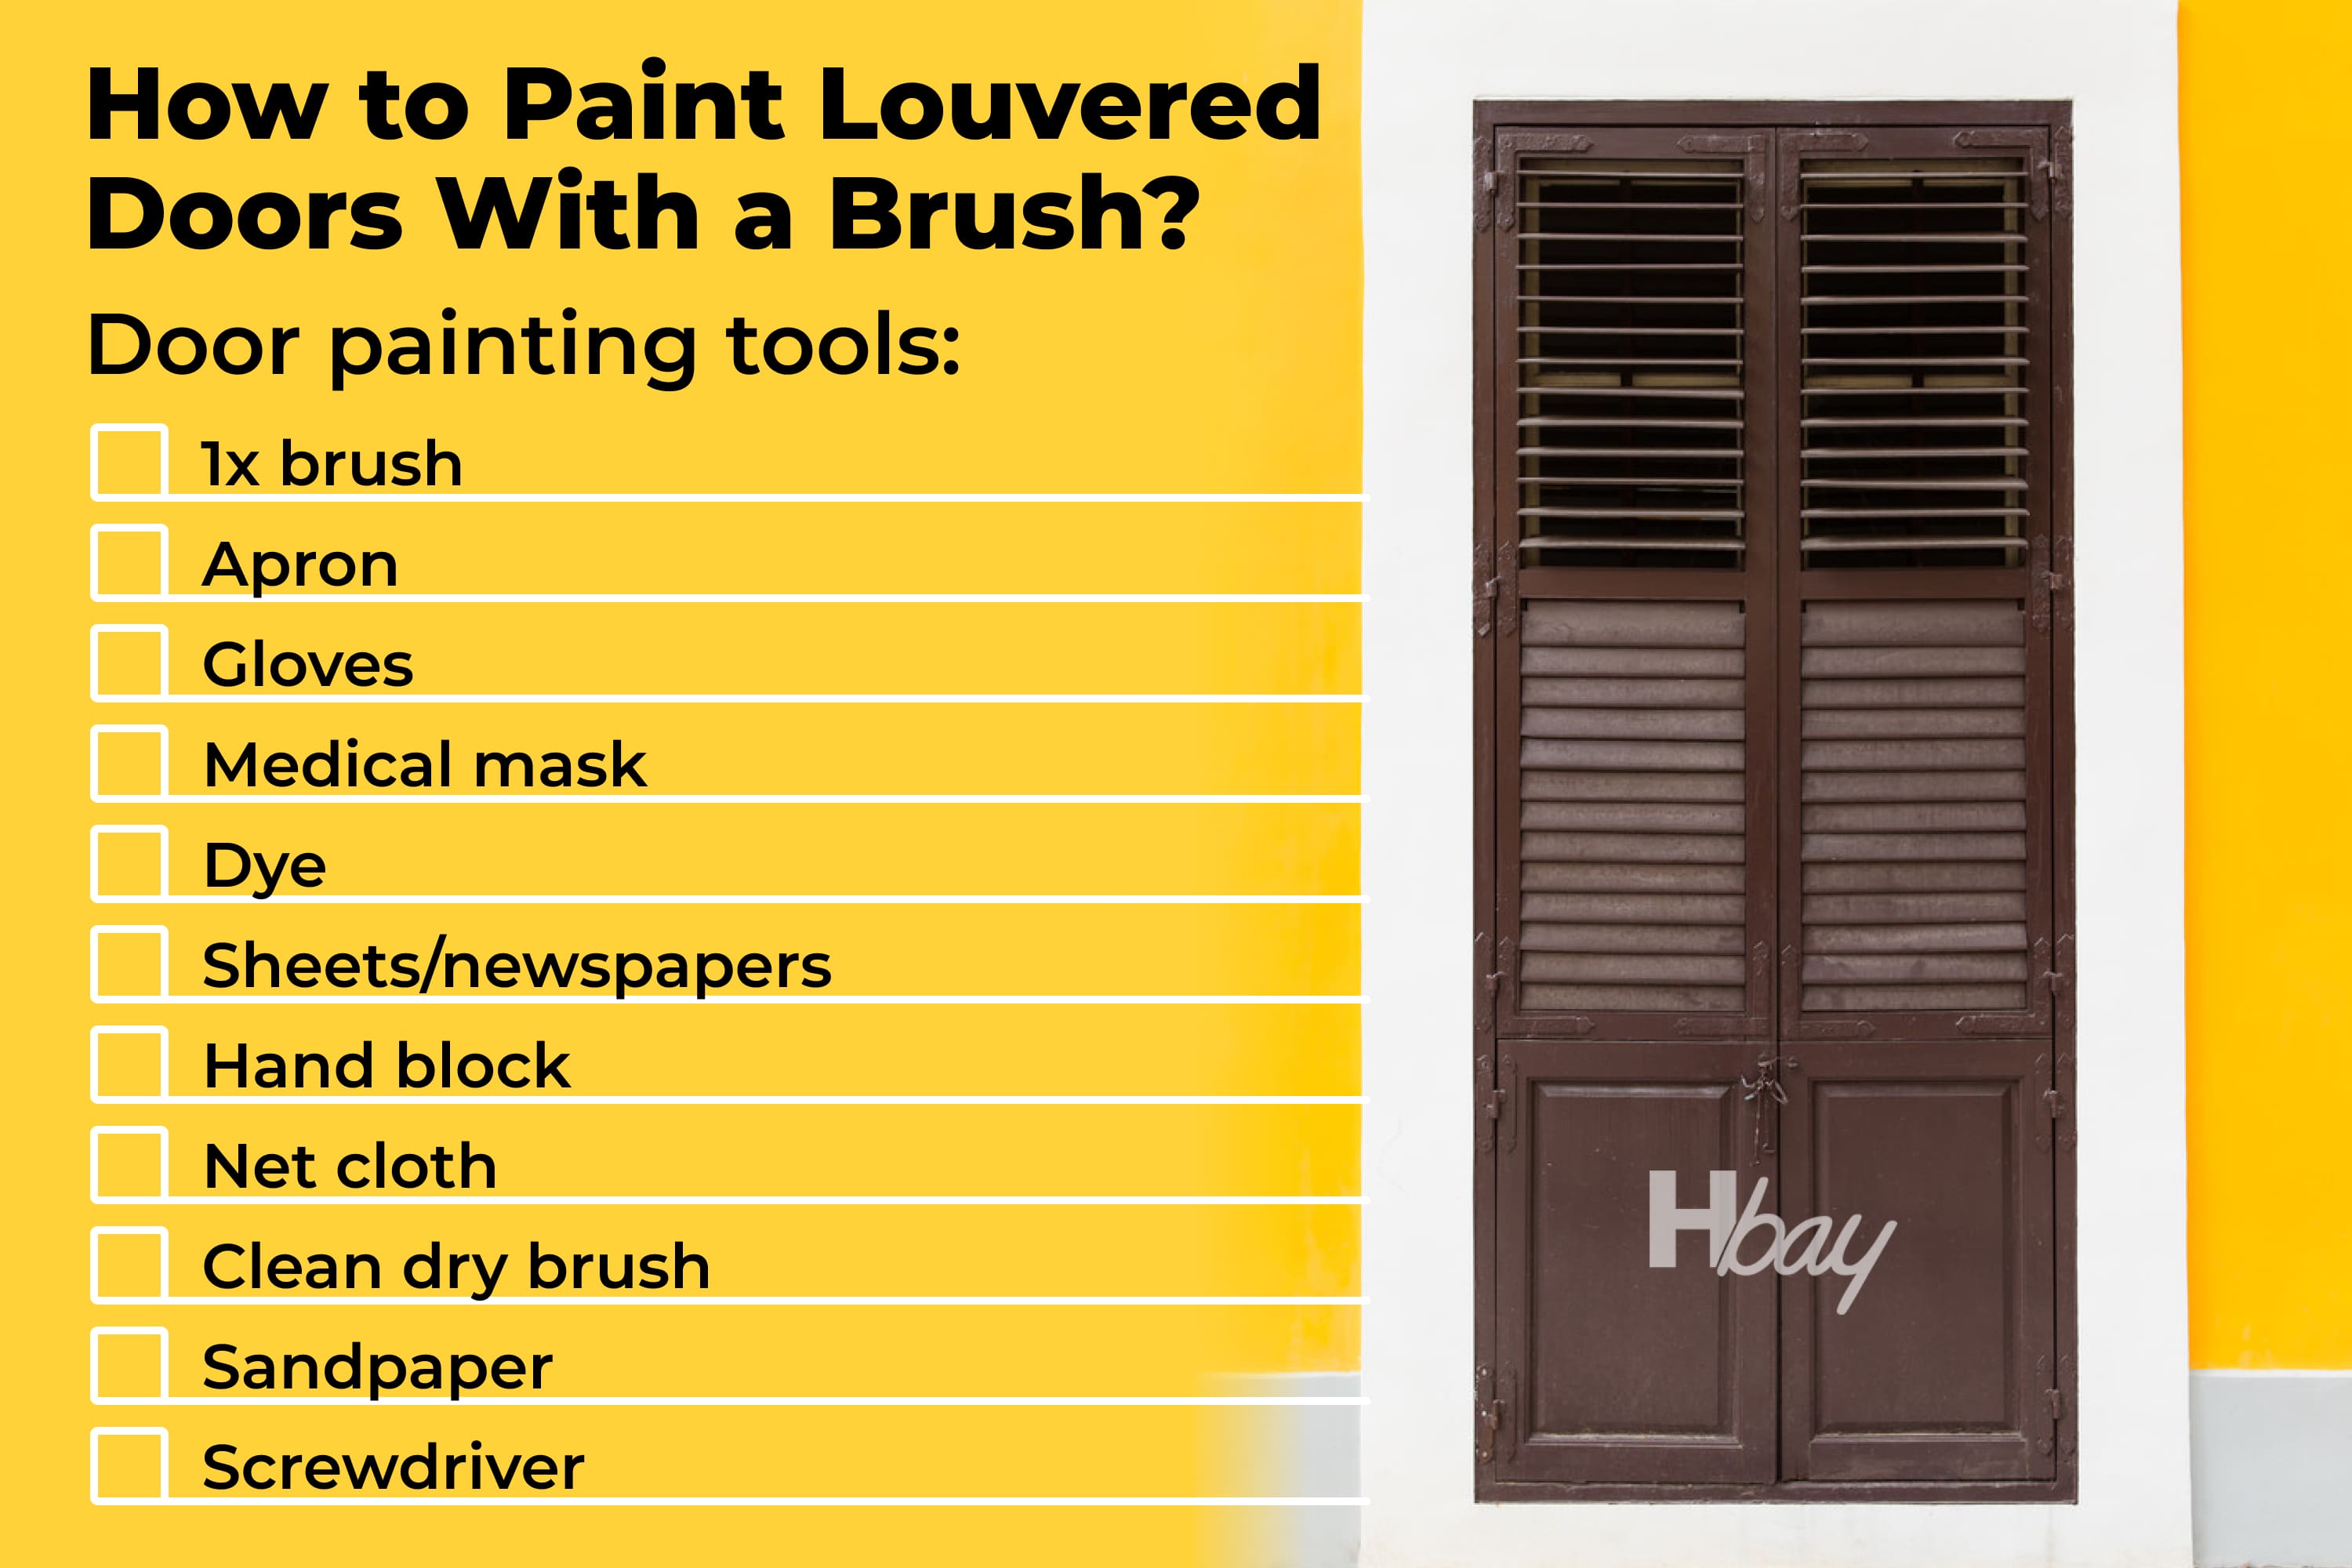 How to Paint Louvered Doors With a Brush